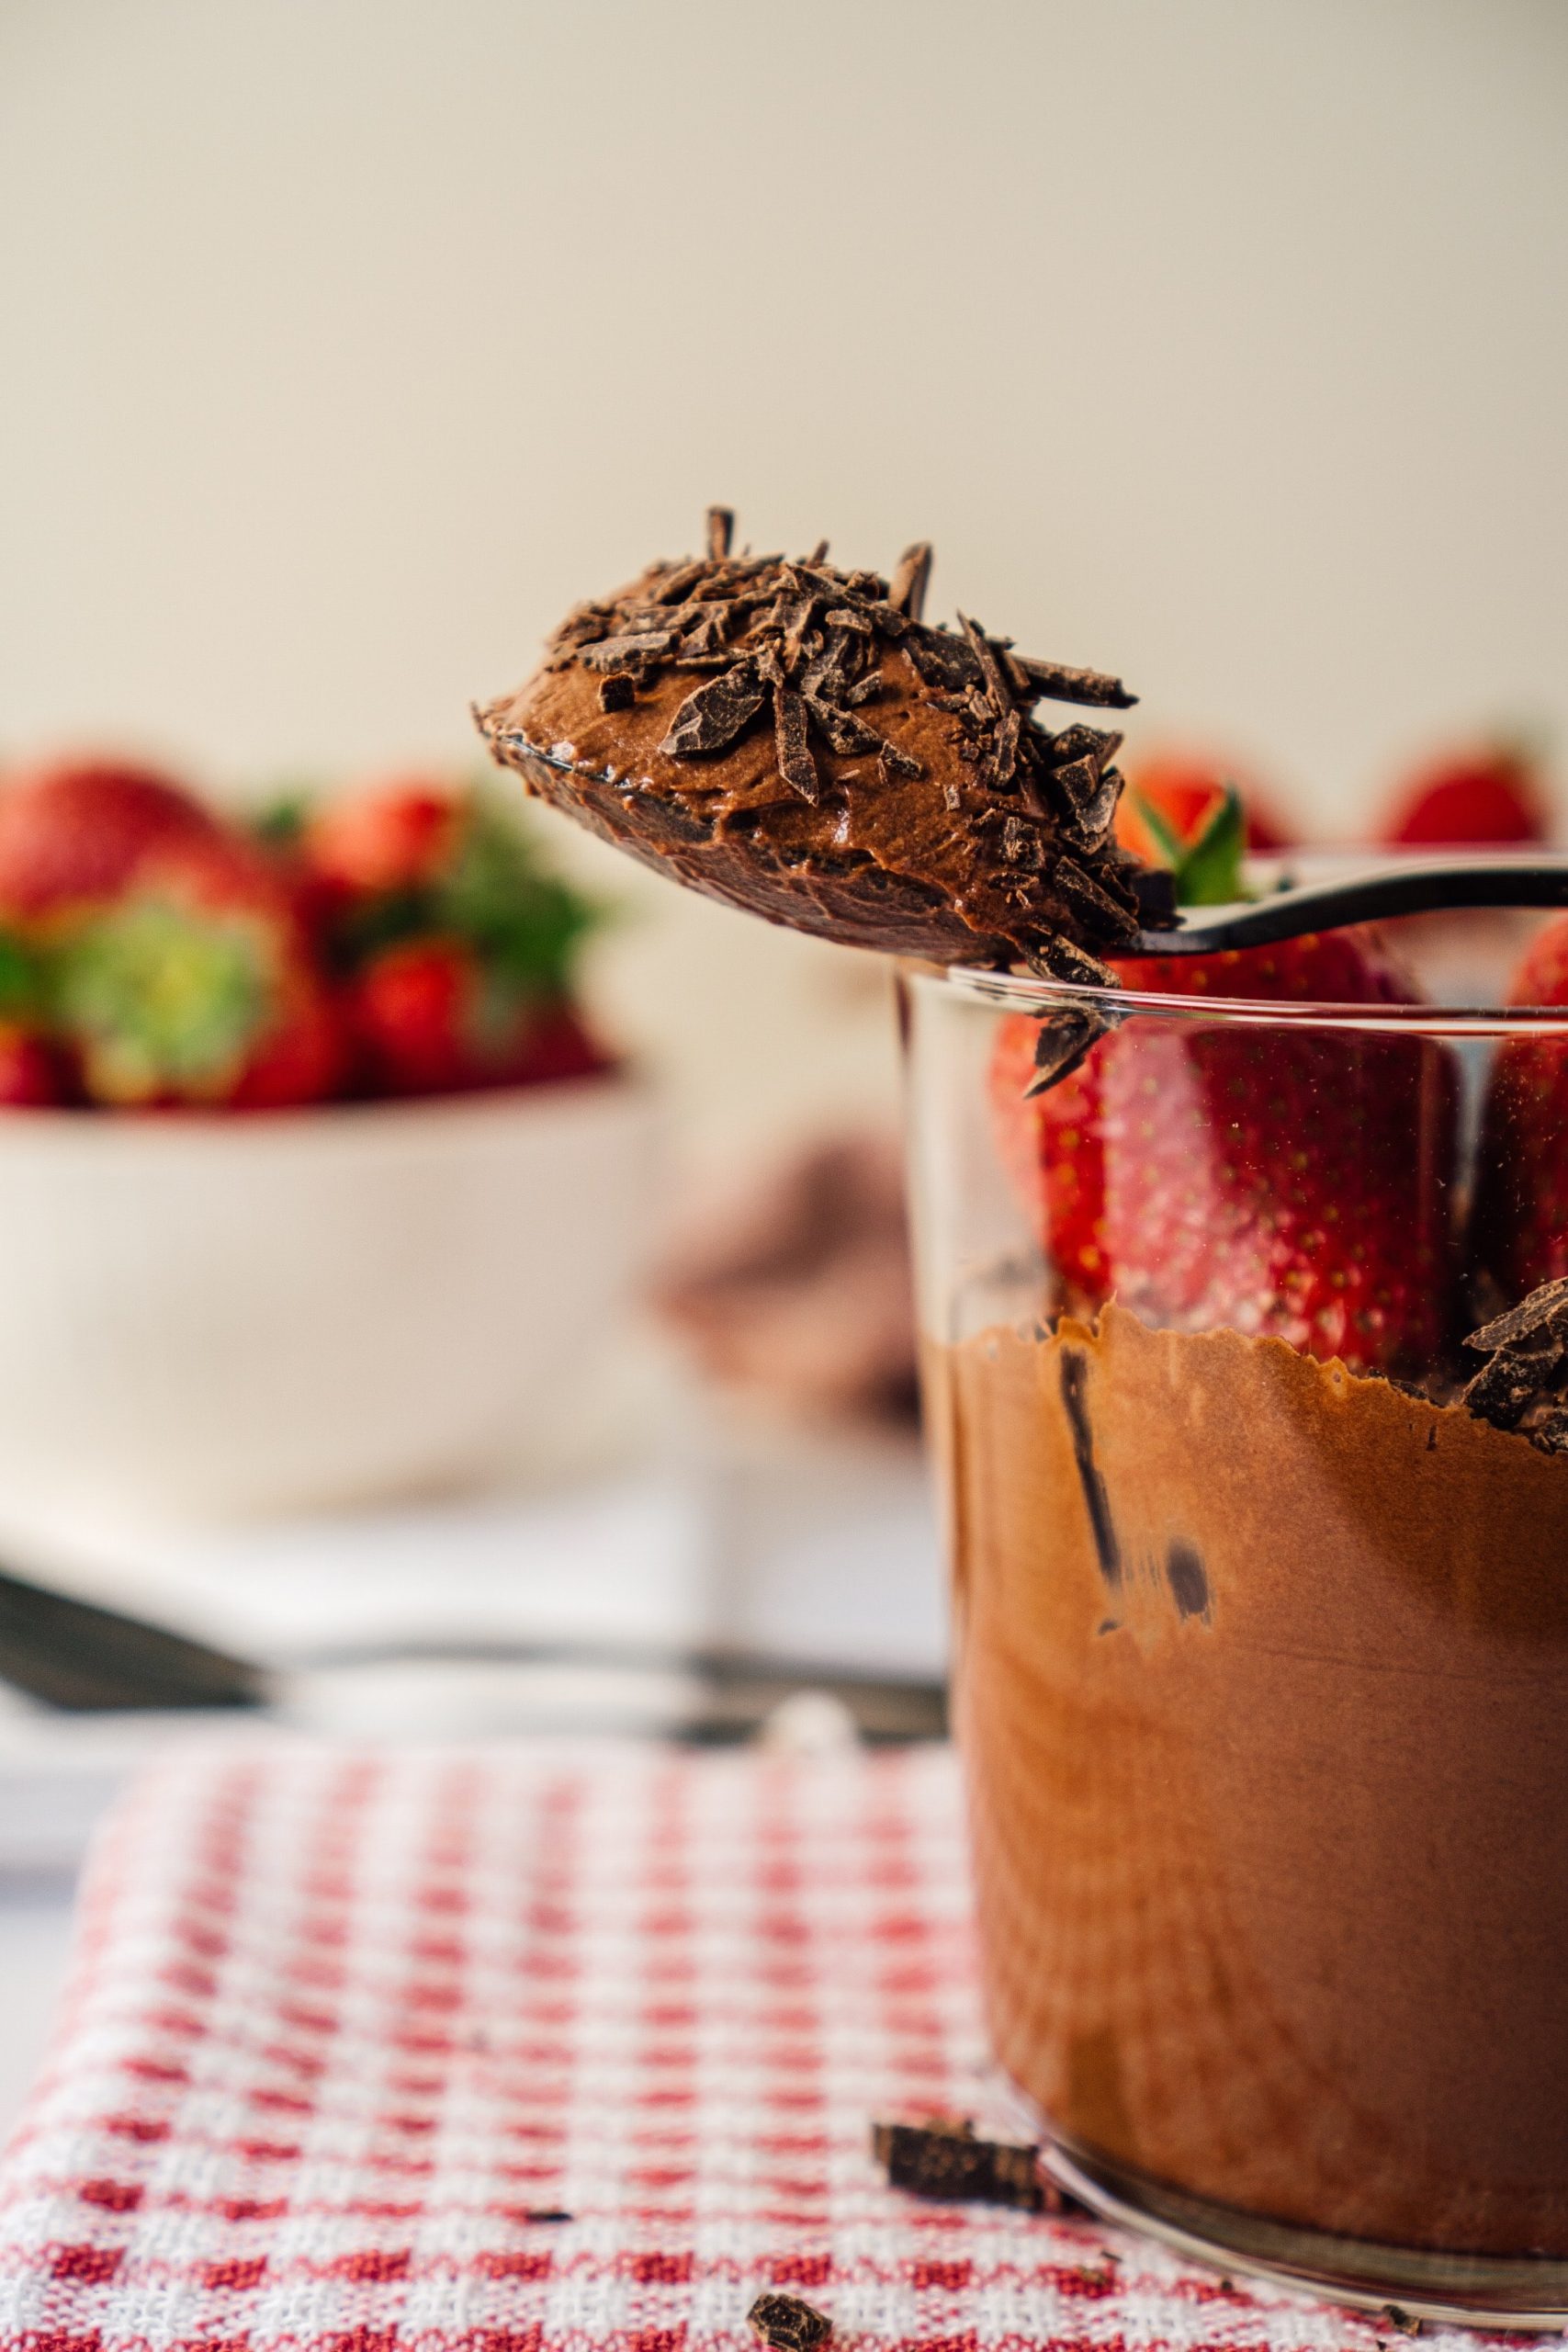 The Best Chocolate Mousse Recipes